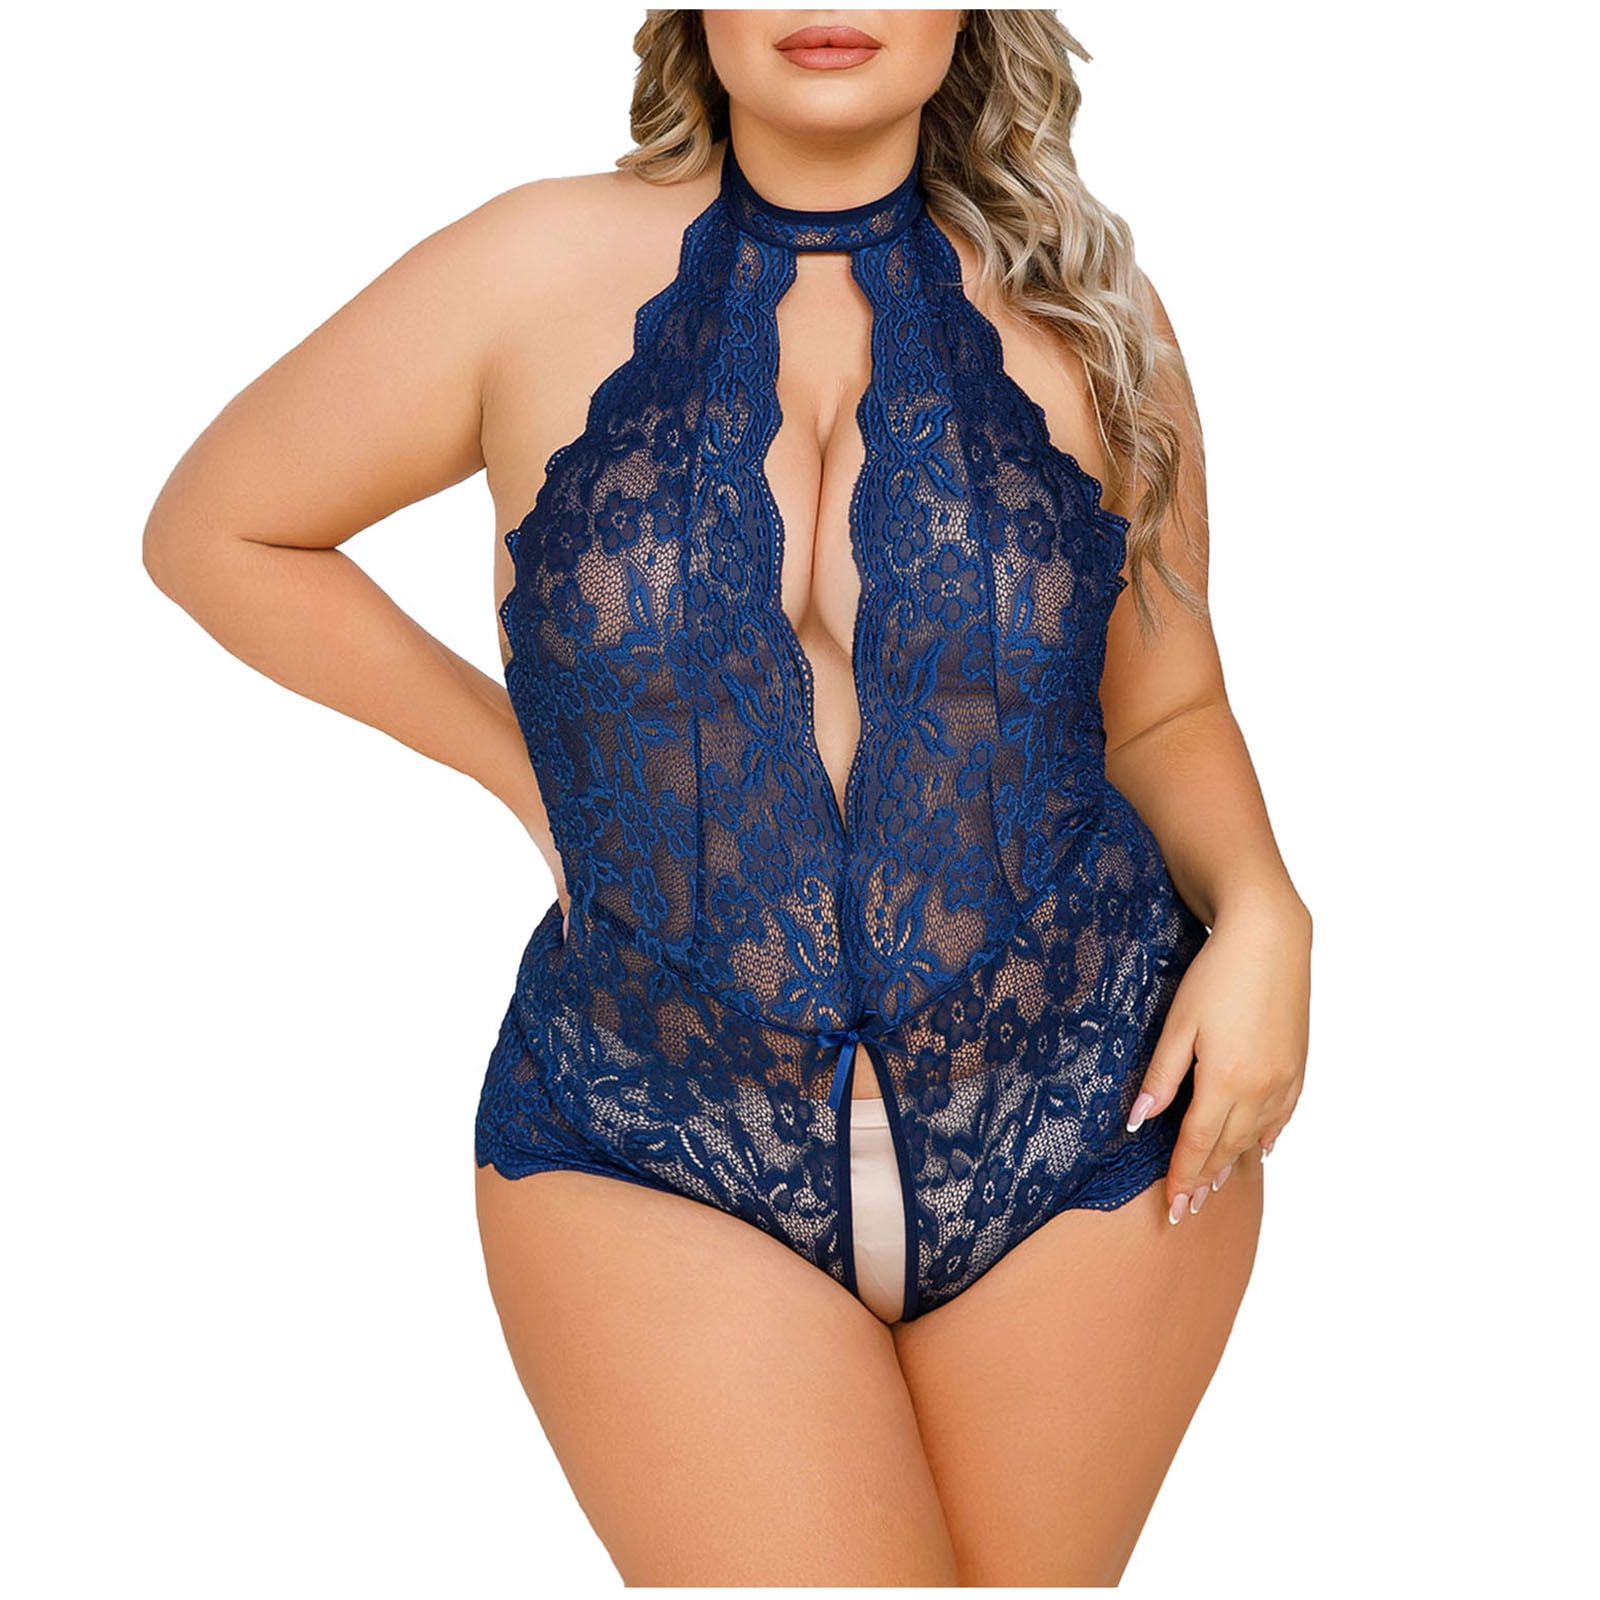 Taqqpue Women's Plus Size Sexy Lingerie Sexy Lace Open Crotch Hollow Out  Temptation Babydoll Underwear Sleepwear Jumpsuit Bodysuits Pajamas Girls  Lingerie for Women 